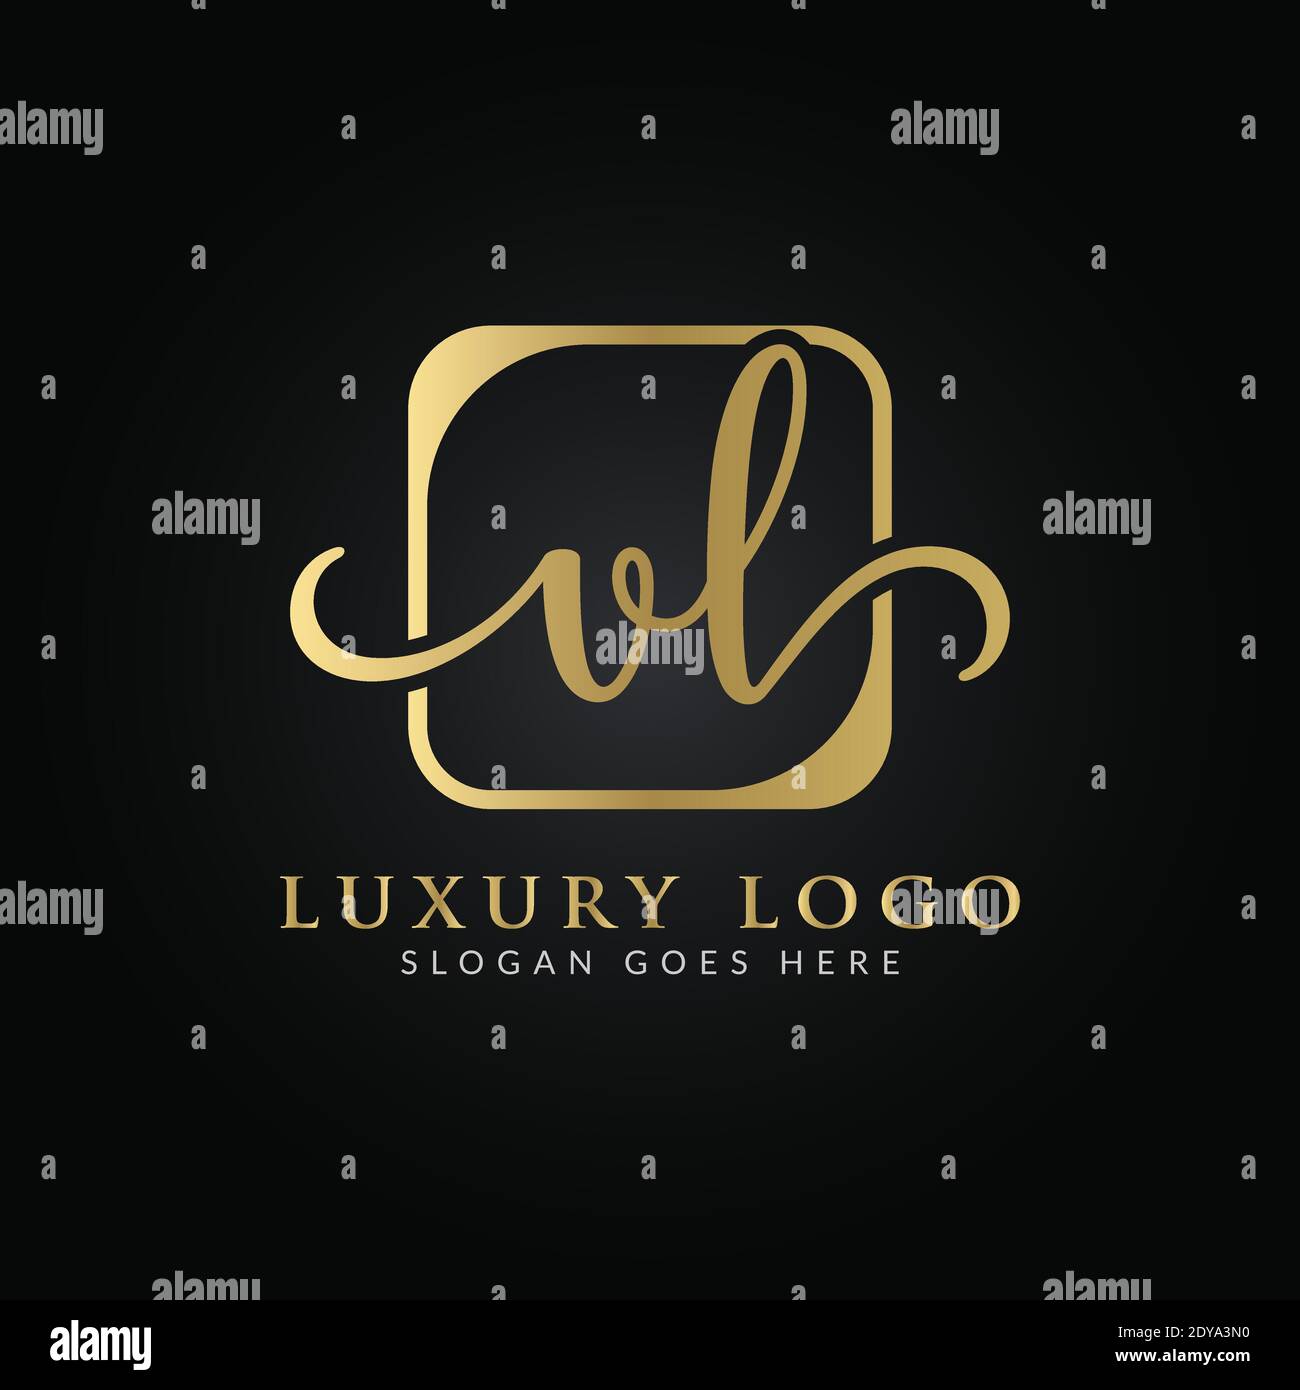 Vl logo design vector icon • wall stickers v, background, beauty